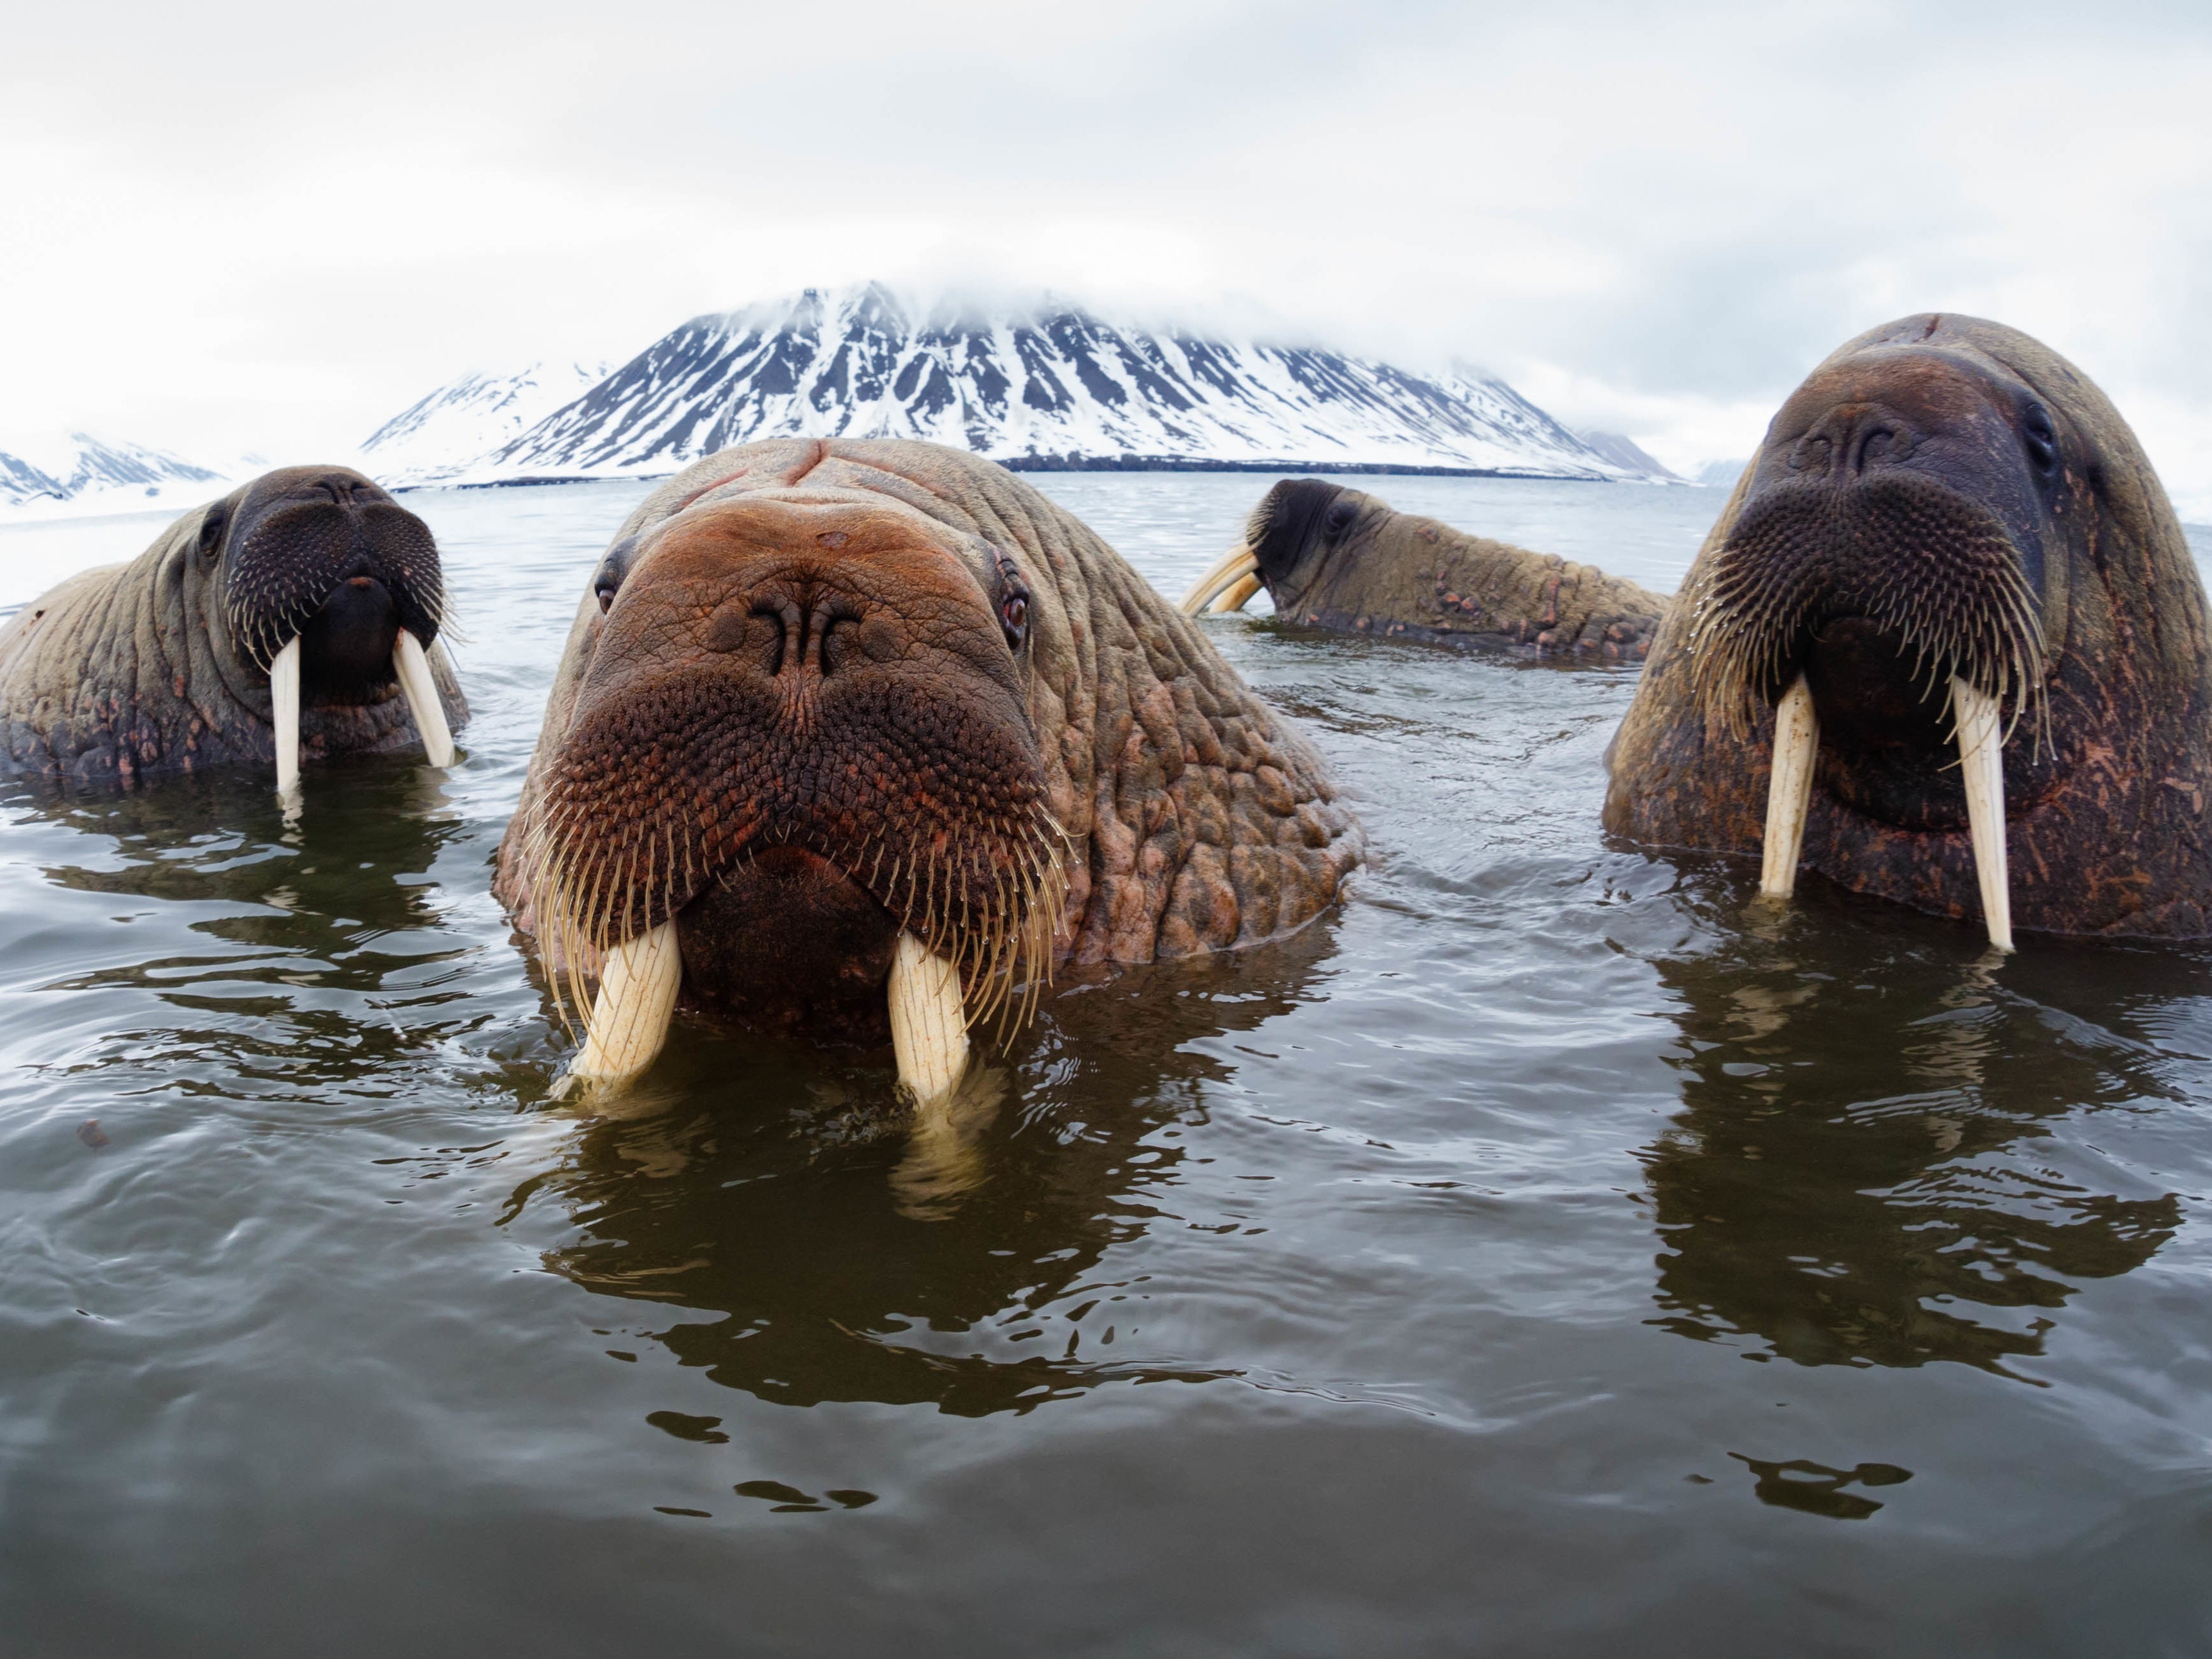 Atlantic walrus hanging out in shallow water in Norway